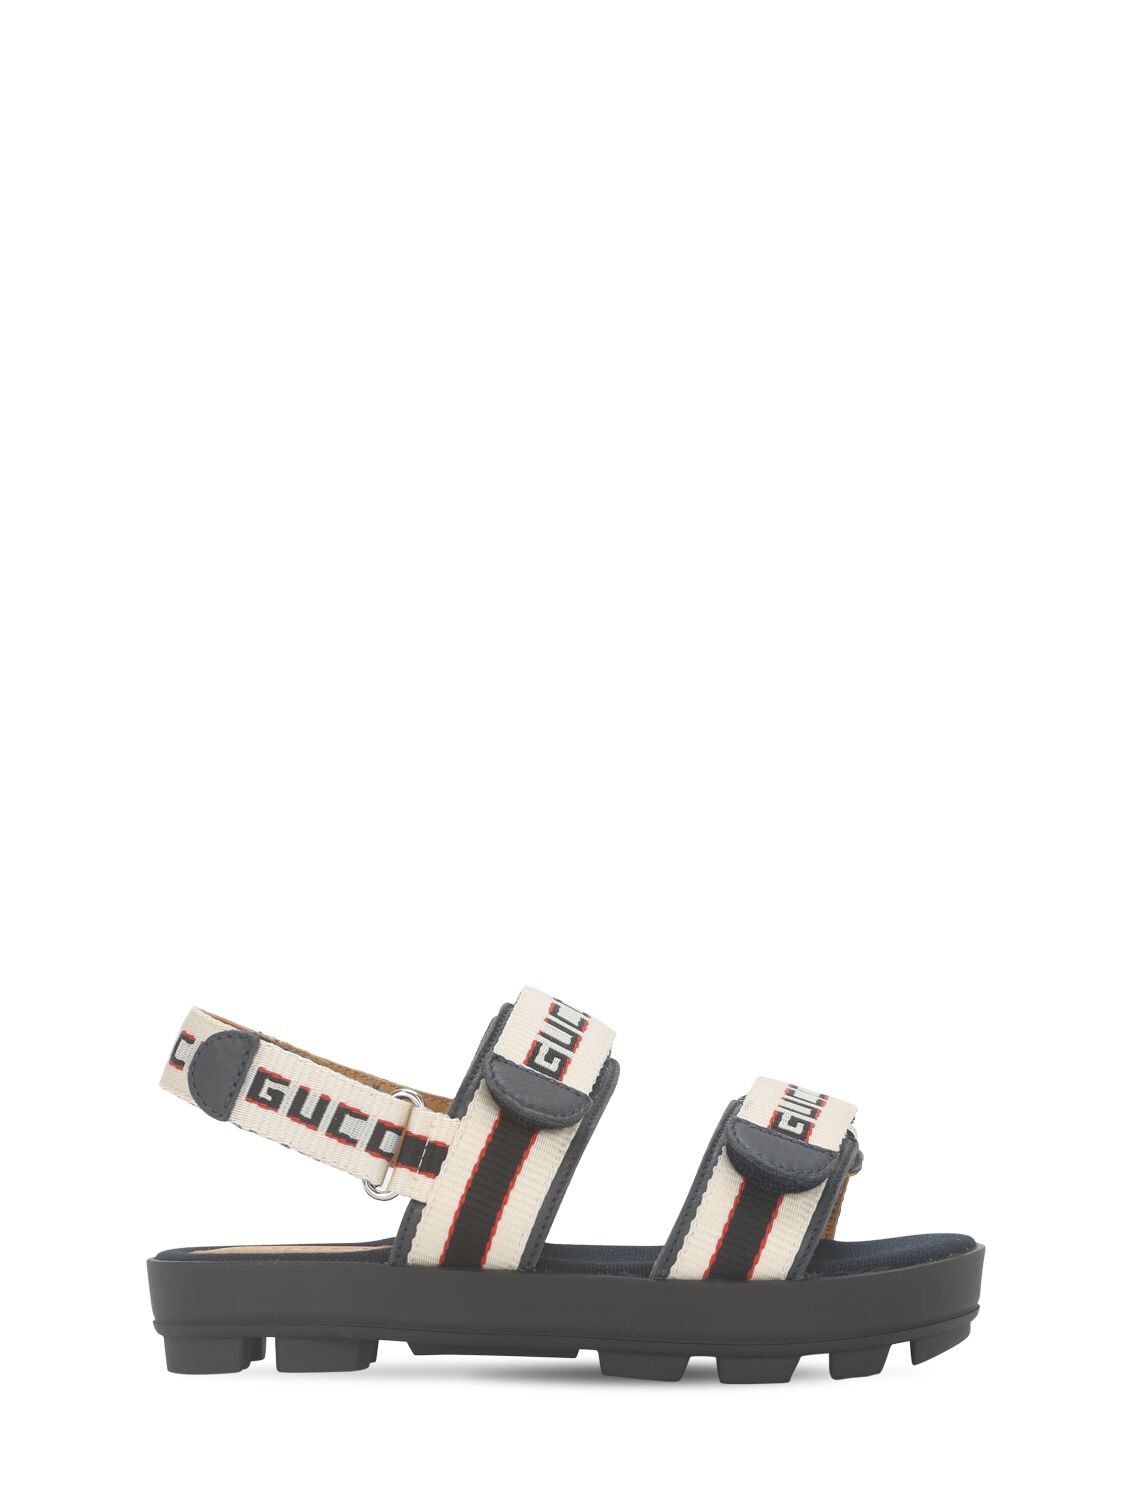 Gucci Kids' Sam Faux Leather Sandals In Navy